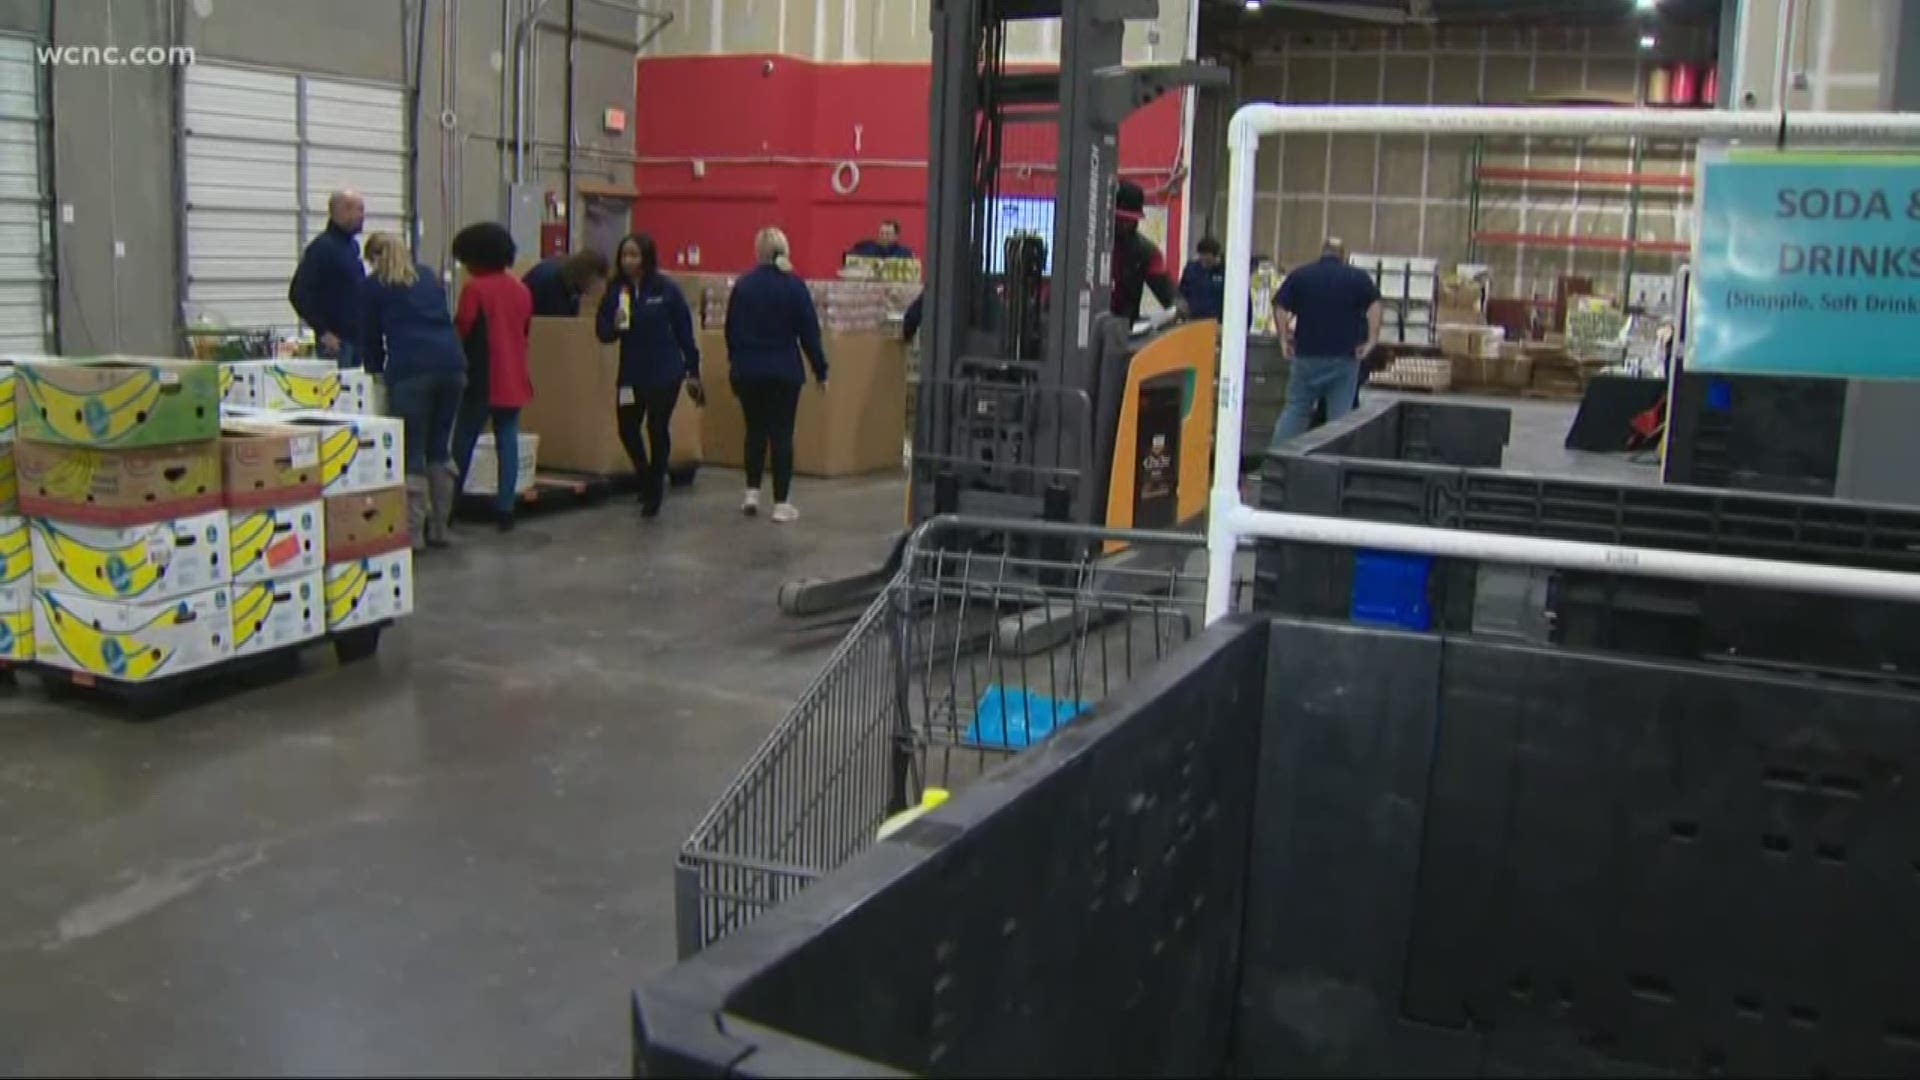 WCNC Charlotte's parent company, TEGNA, sent a truck full of 10,000 pounds of food to the Loaves & Fishes warehouse to help feed local families in need.